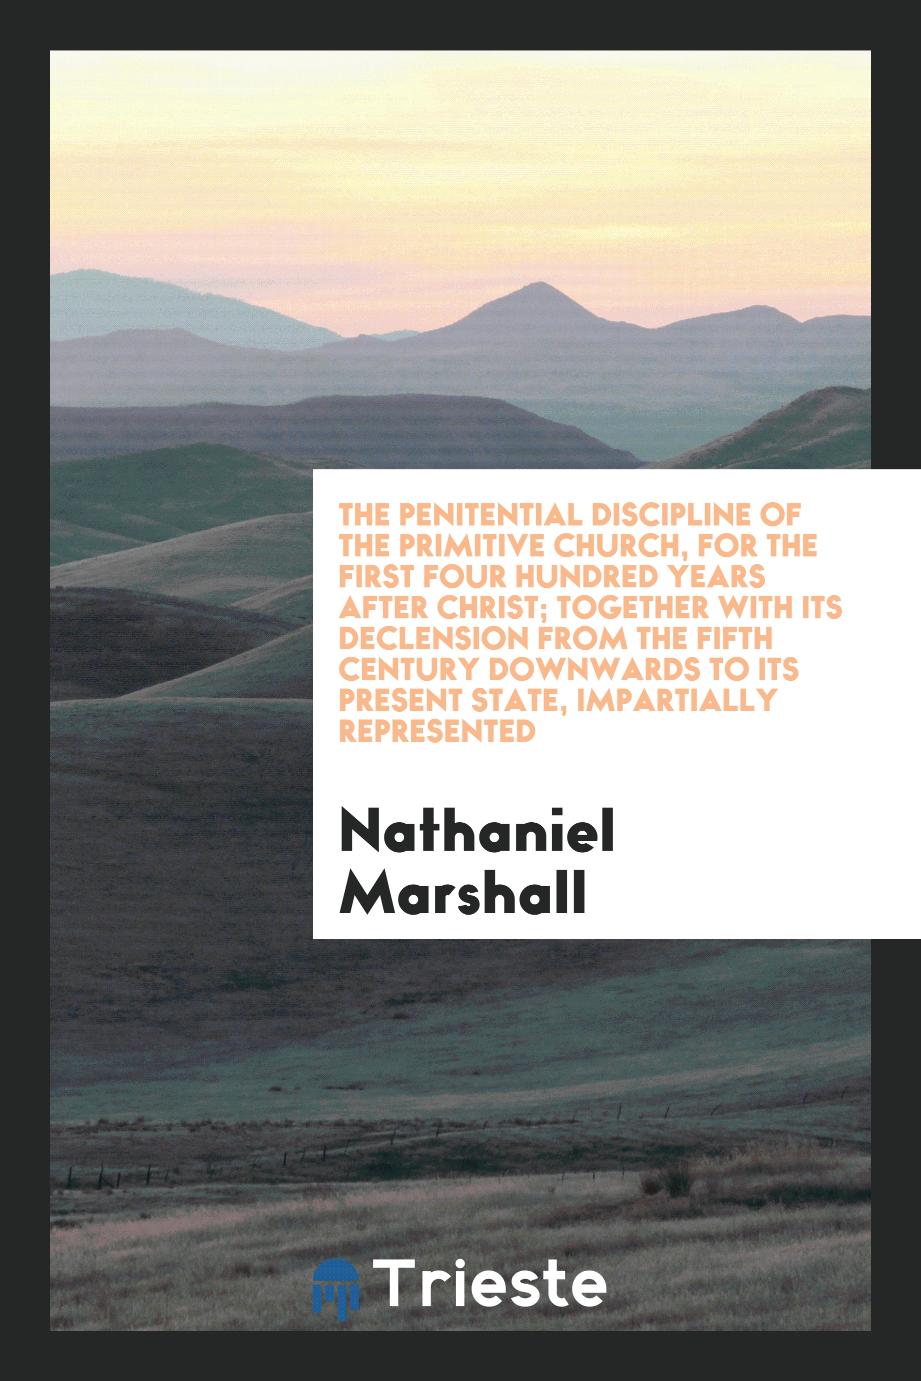 The penitential discipline of the primitive church, for the first four hundred years after Christ; together with its declension from the fifth century downwards to its present state, impartially represented